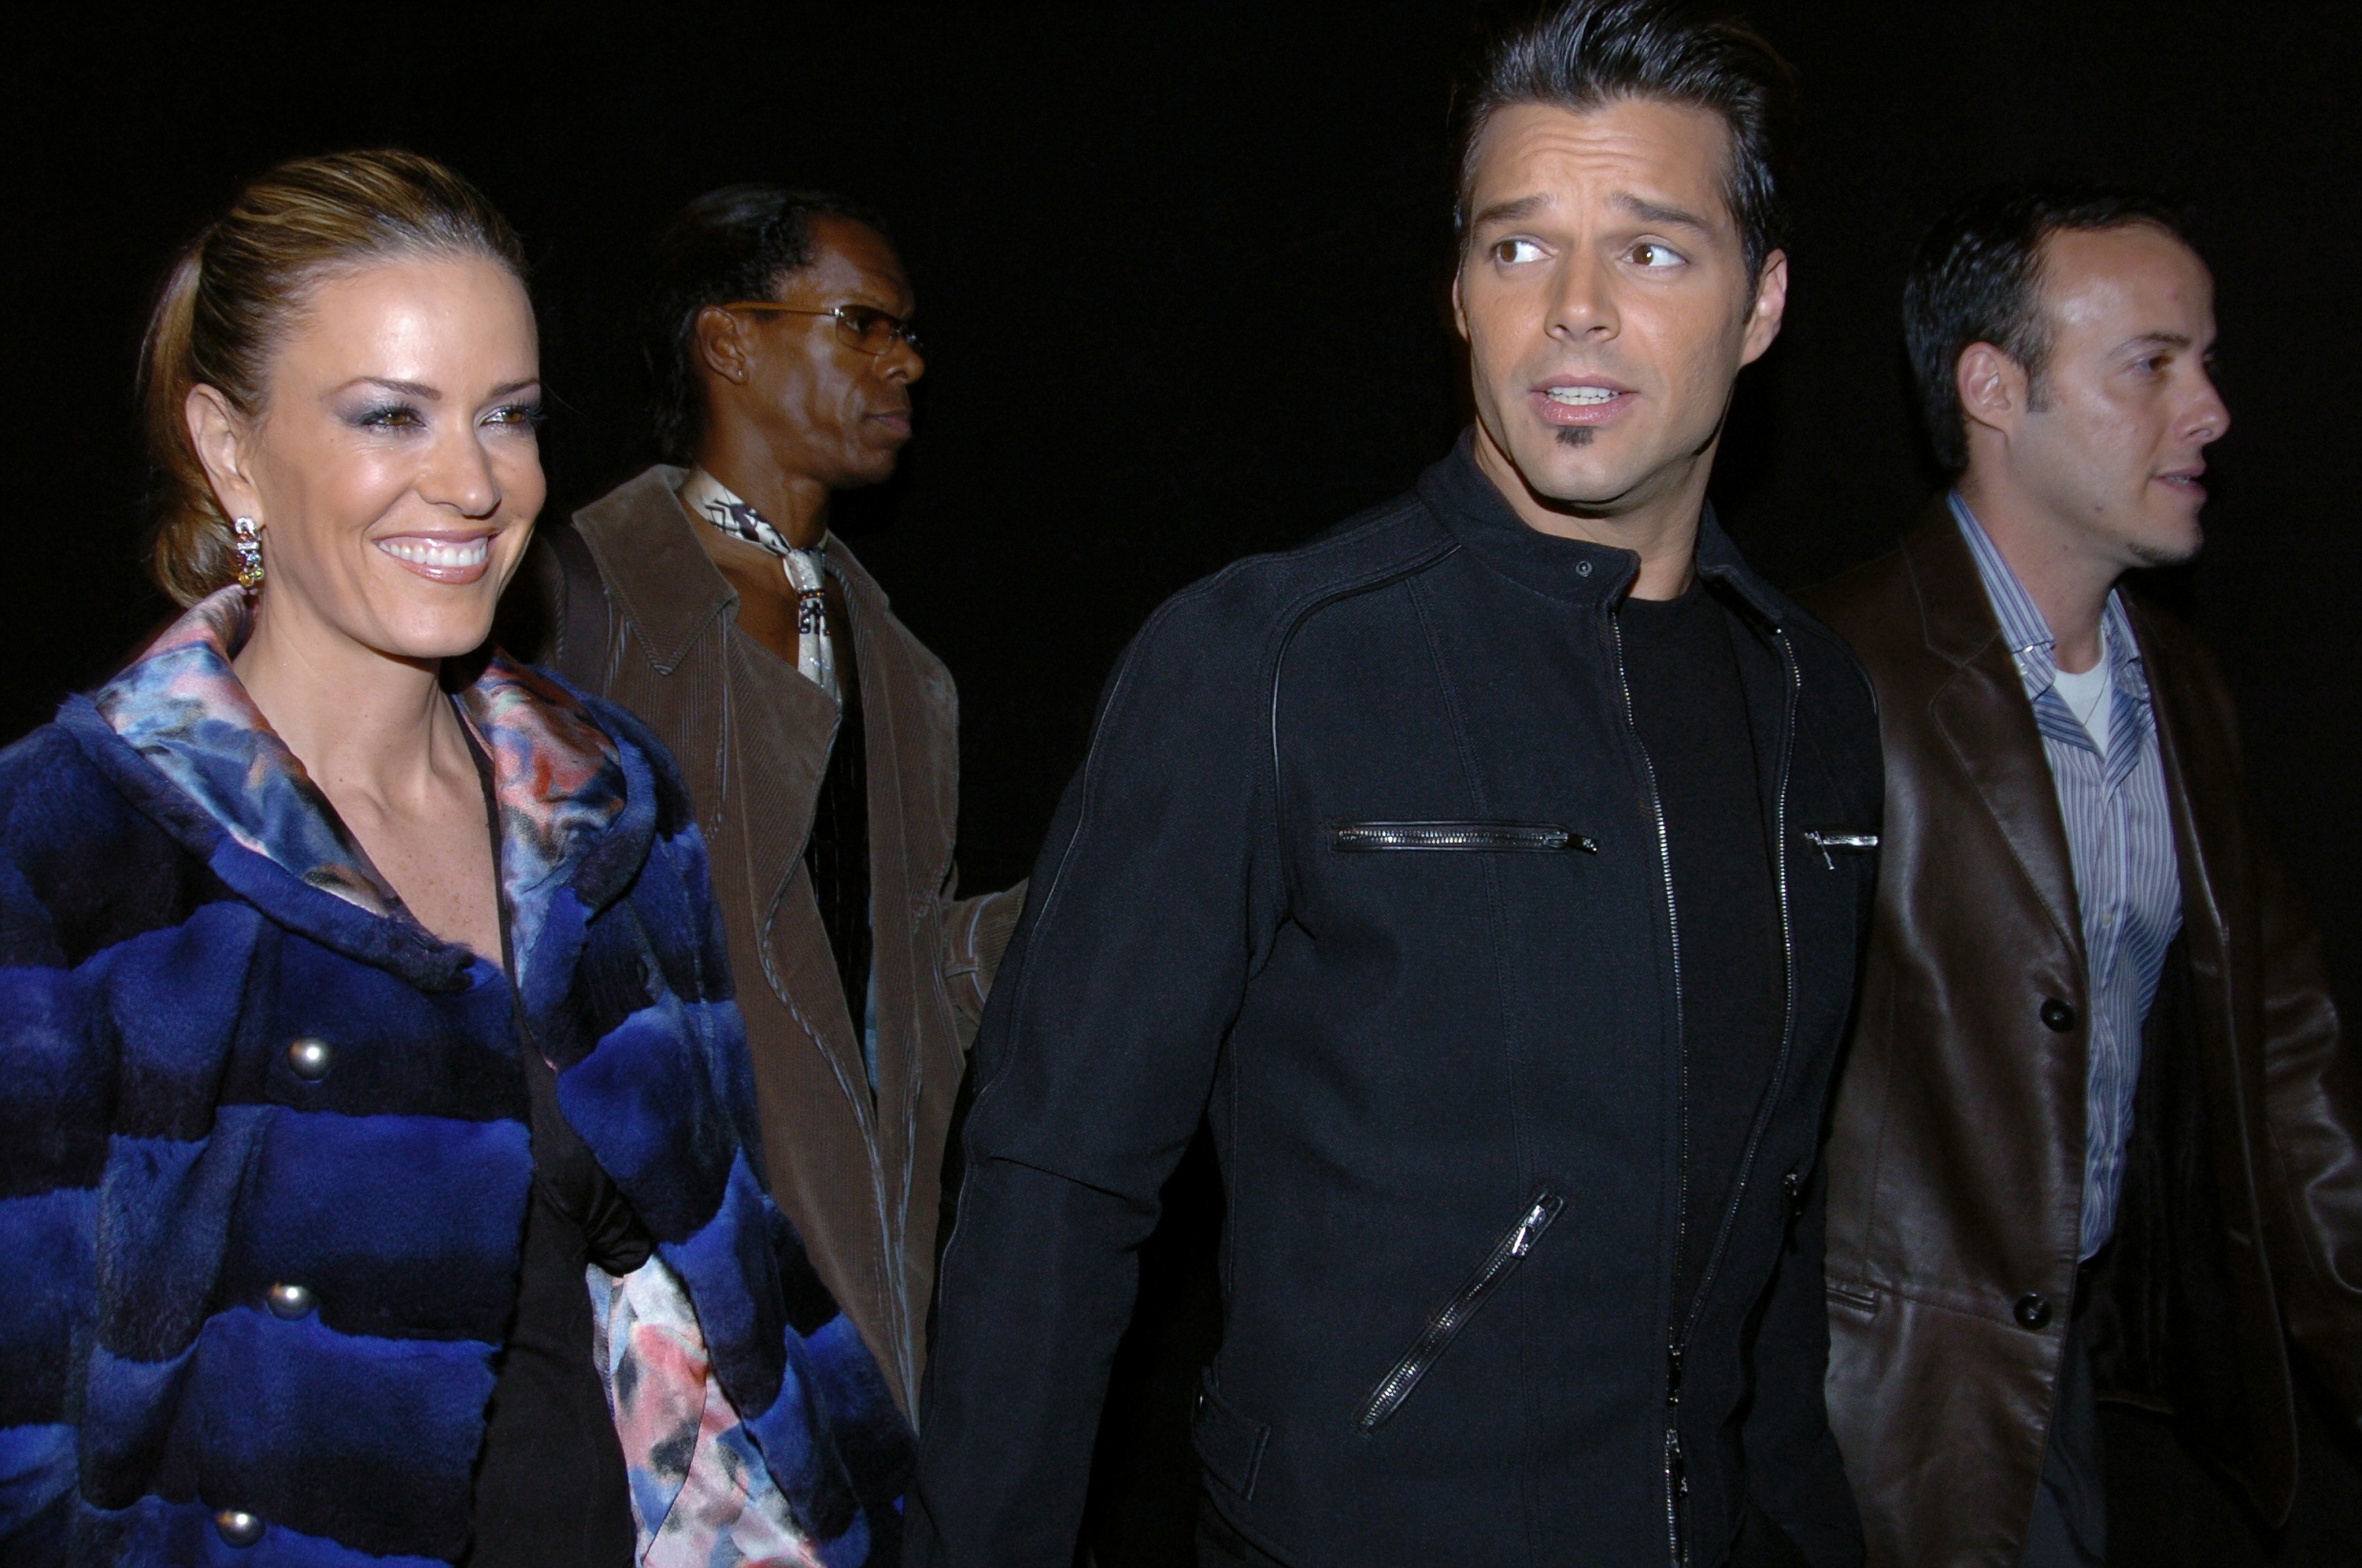 UNITED STATES - OCTOBER 26:  Ricky Martin and friend Rebecca de Alba arrive for designer Giorgio Armani's fashion show at Hudson River Pier 94.  (Photo by Richard Corkery/NY Daily News Archive via Getty Images)